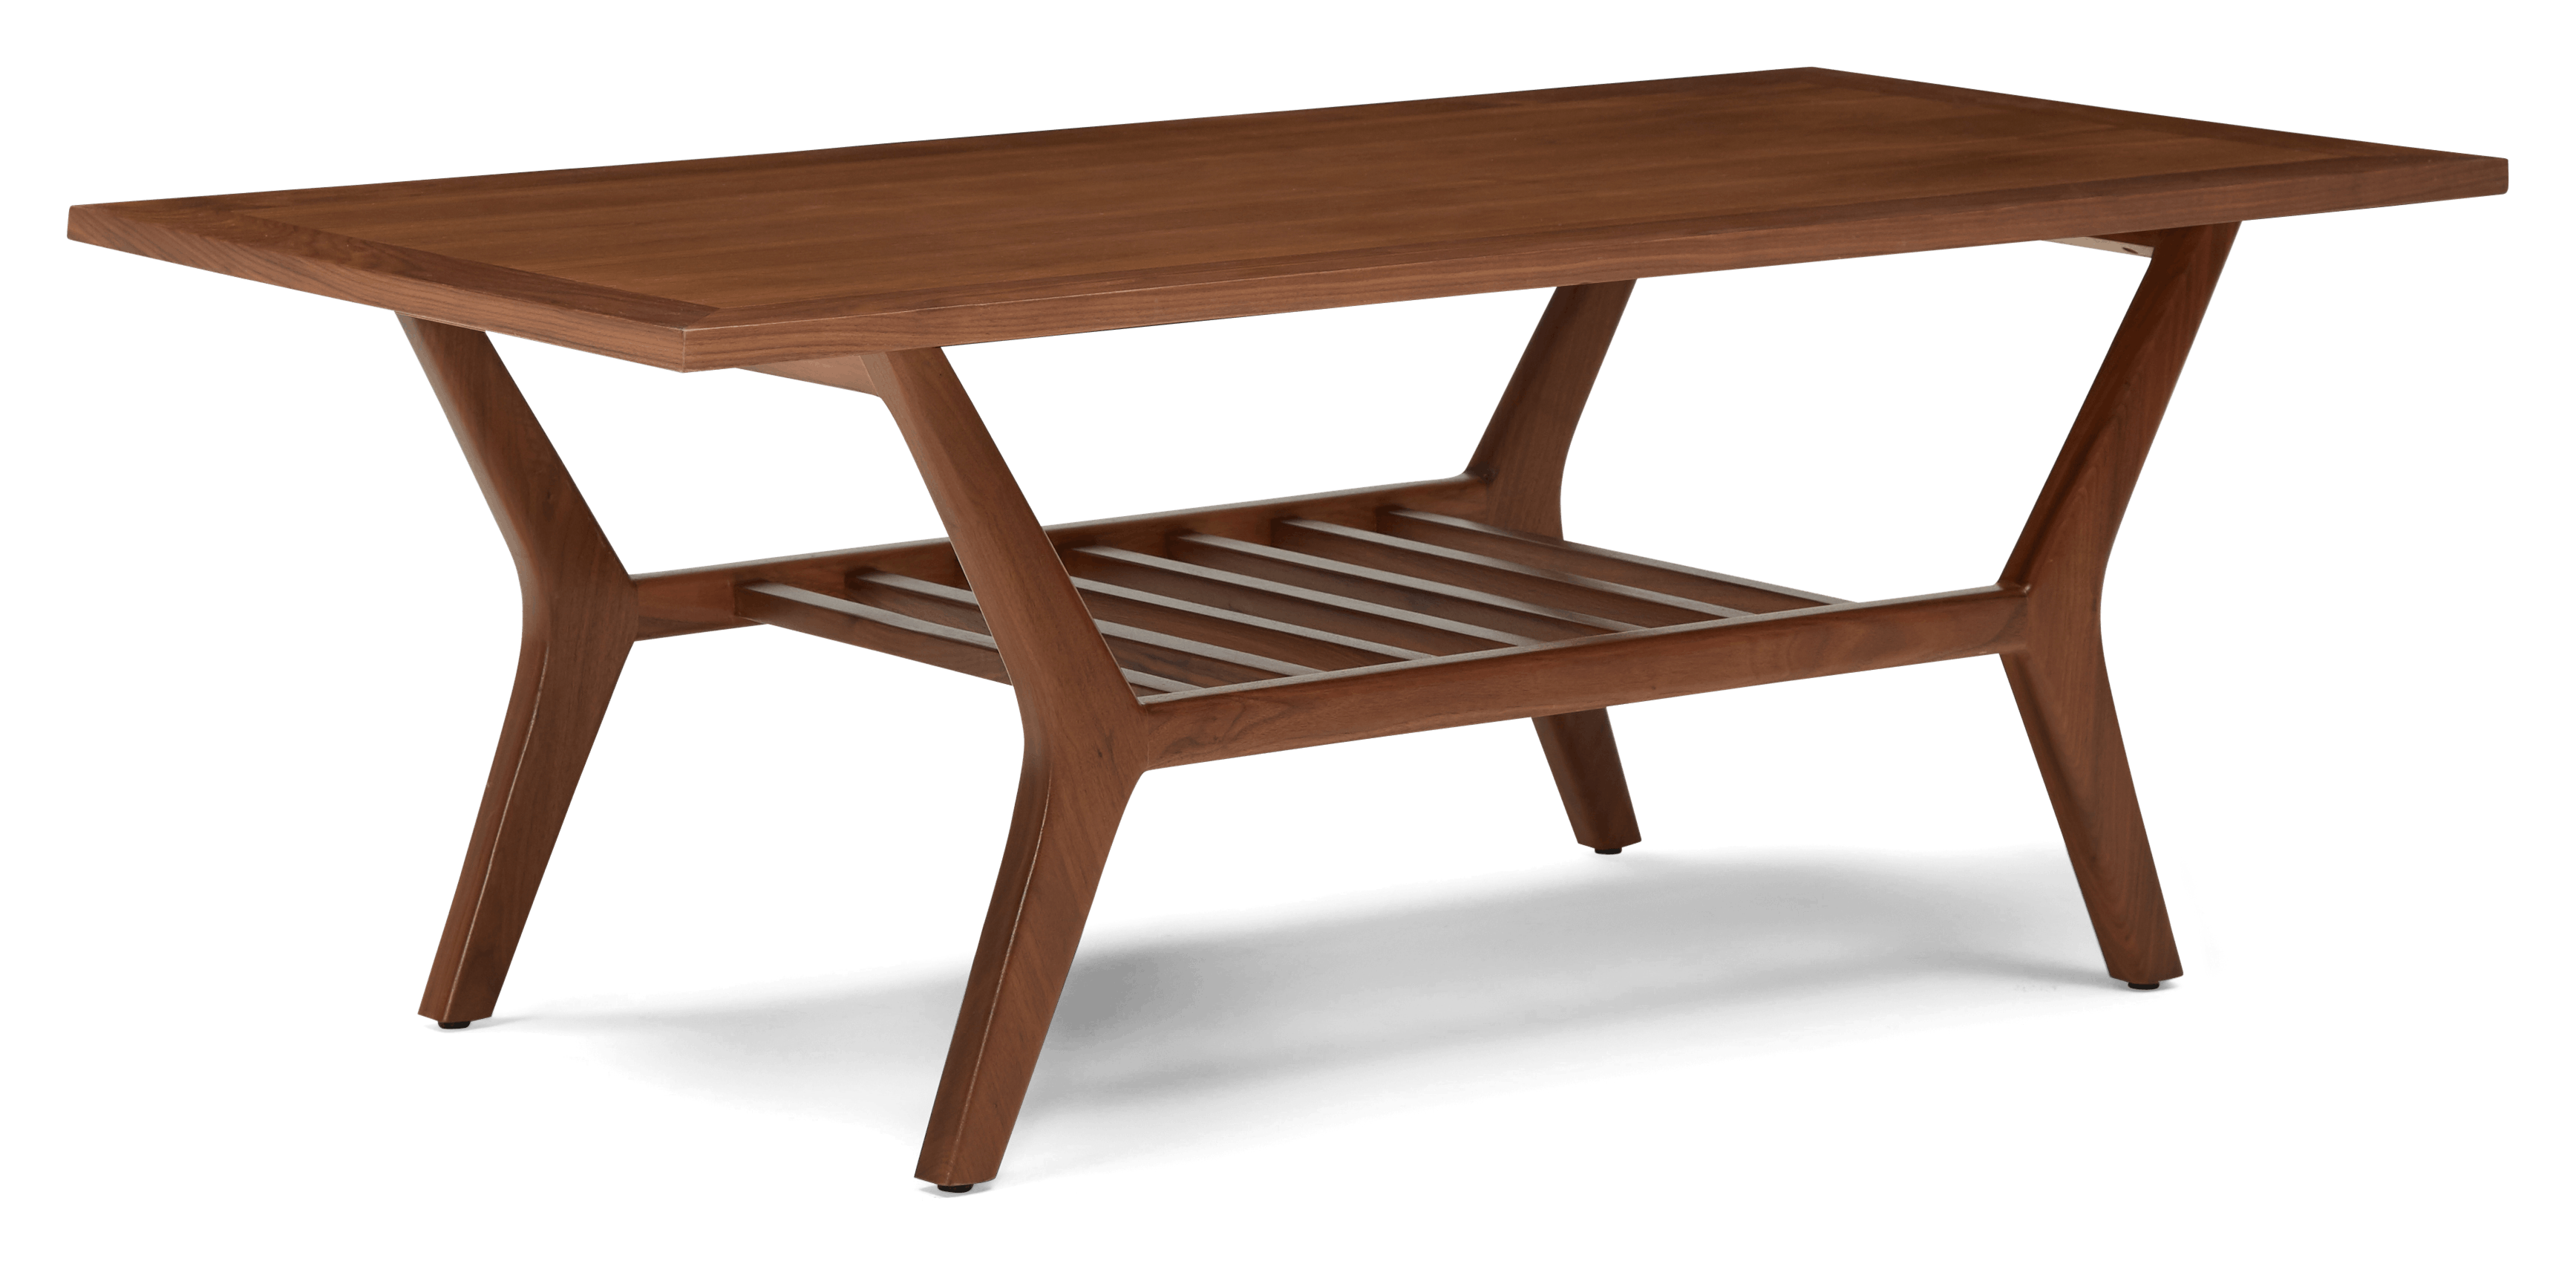 cullen coffee table